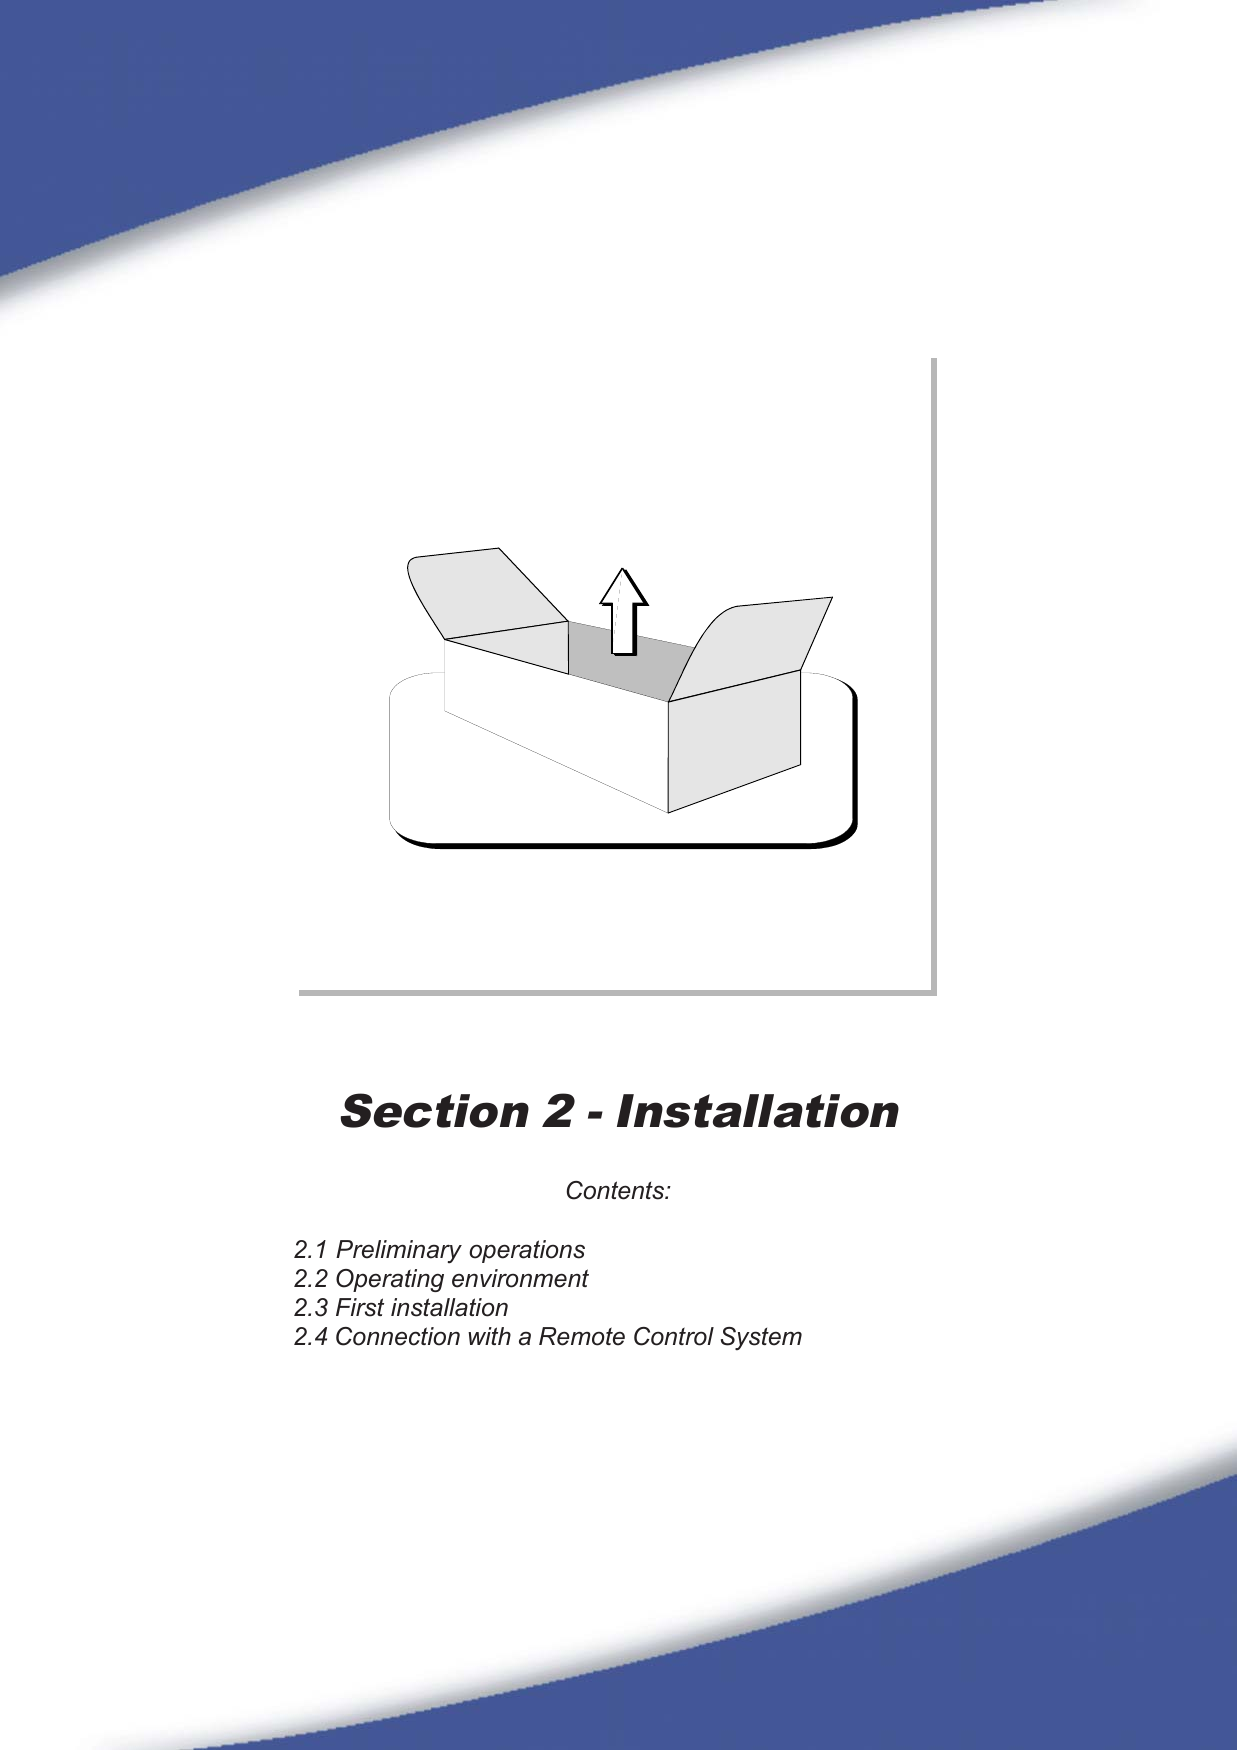 47Section 2 - InstallationContents:2.1 Preliminary operations2.2 Operating environment2.3 First installation2.4 Connection with a Remote Control System